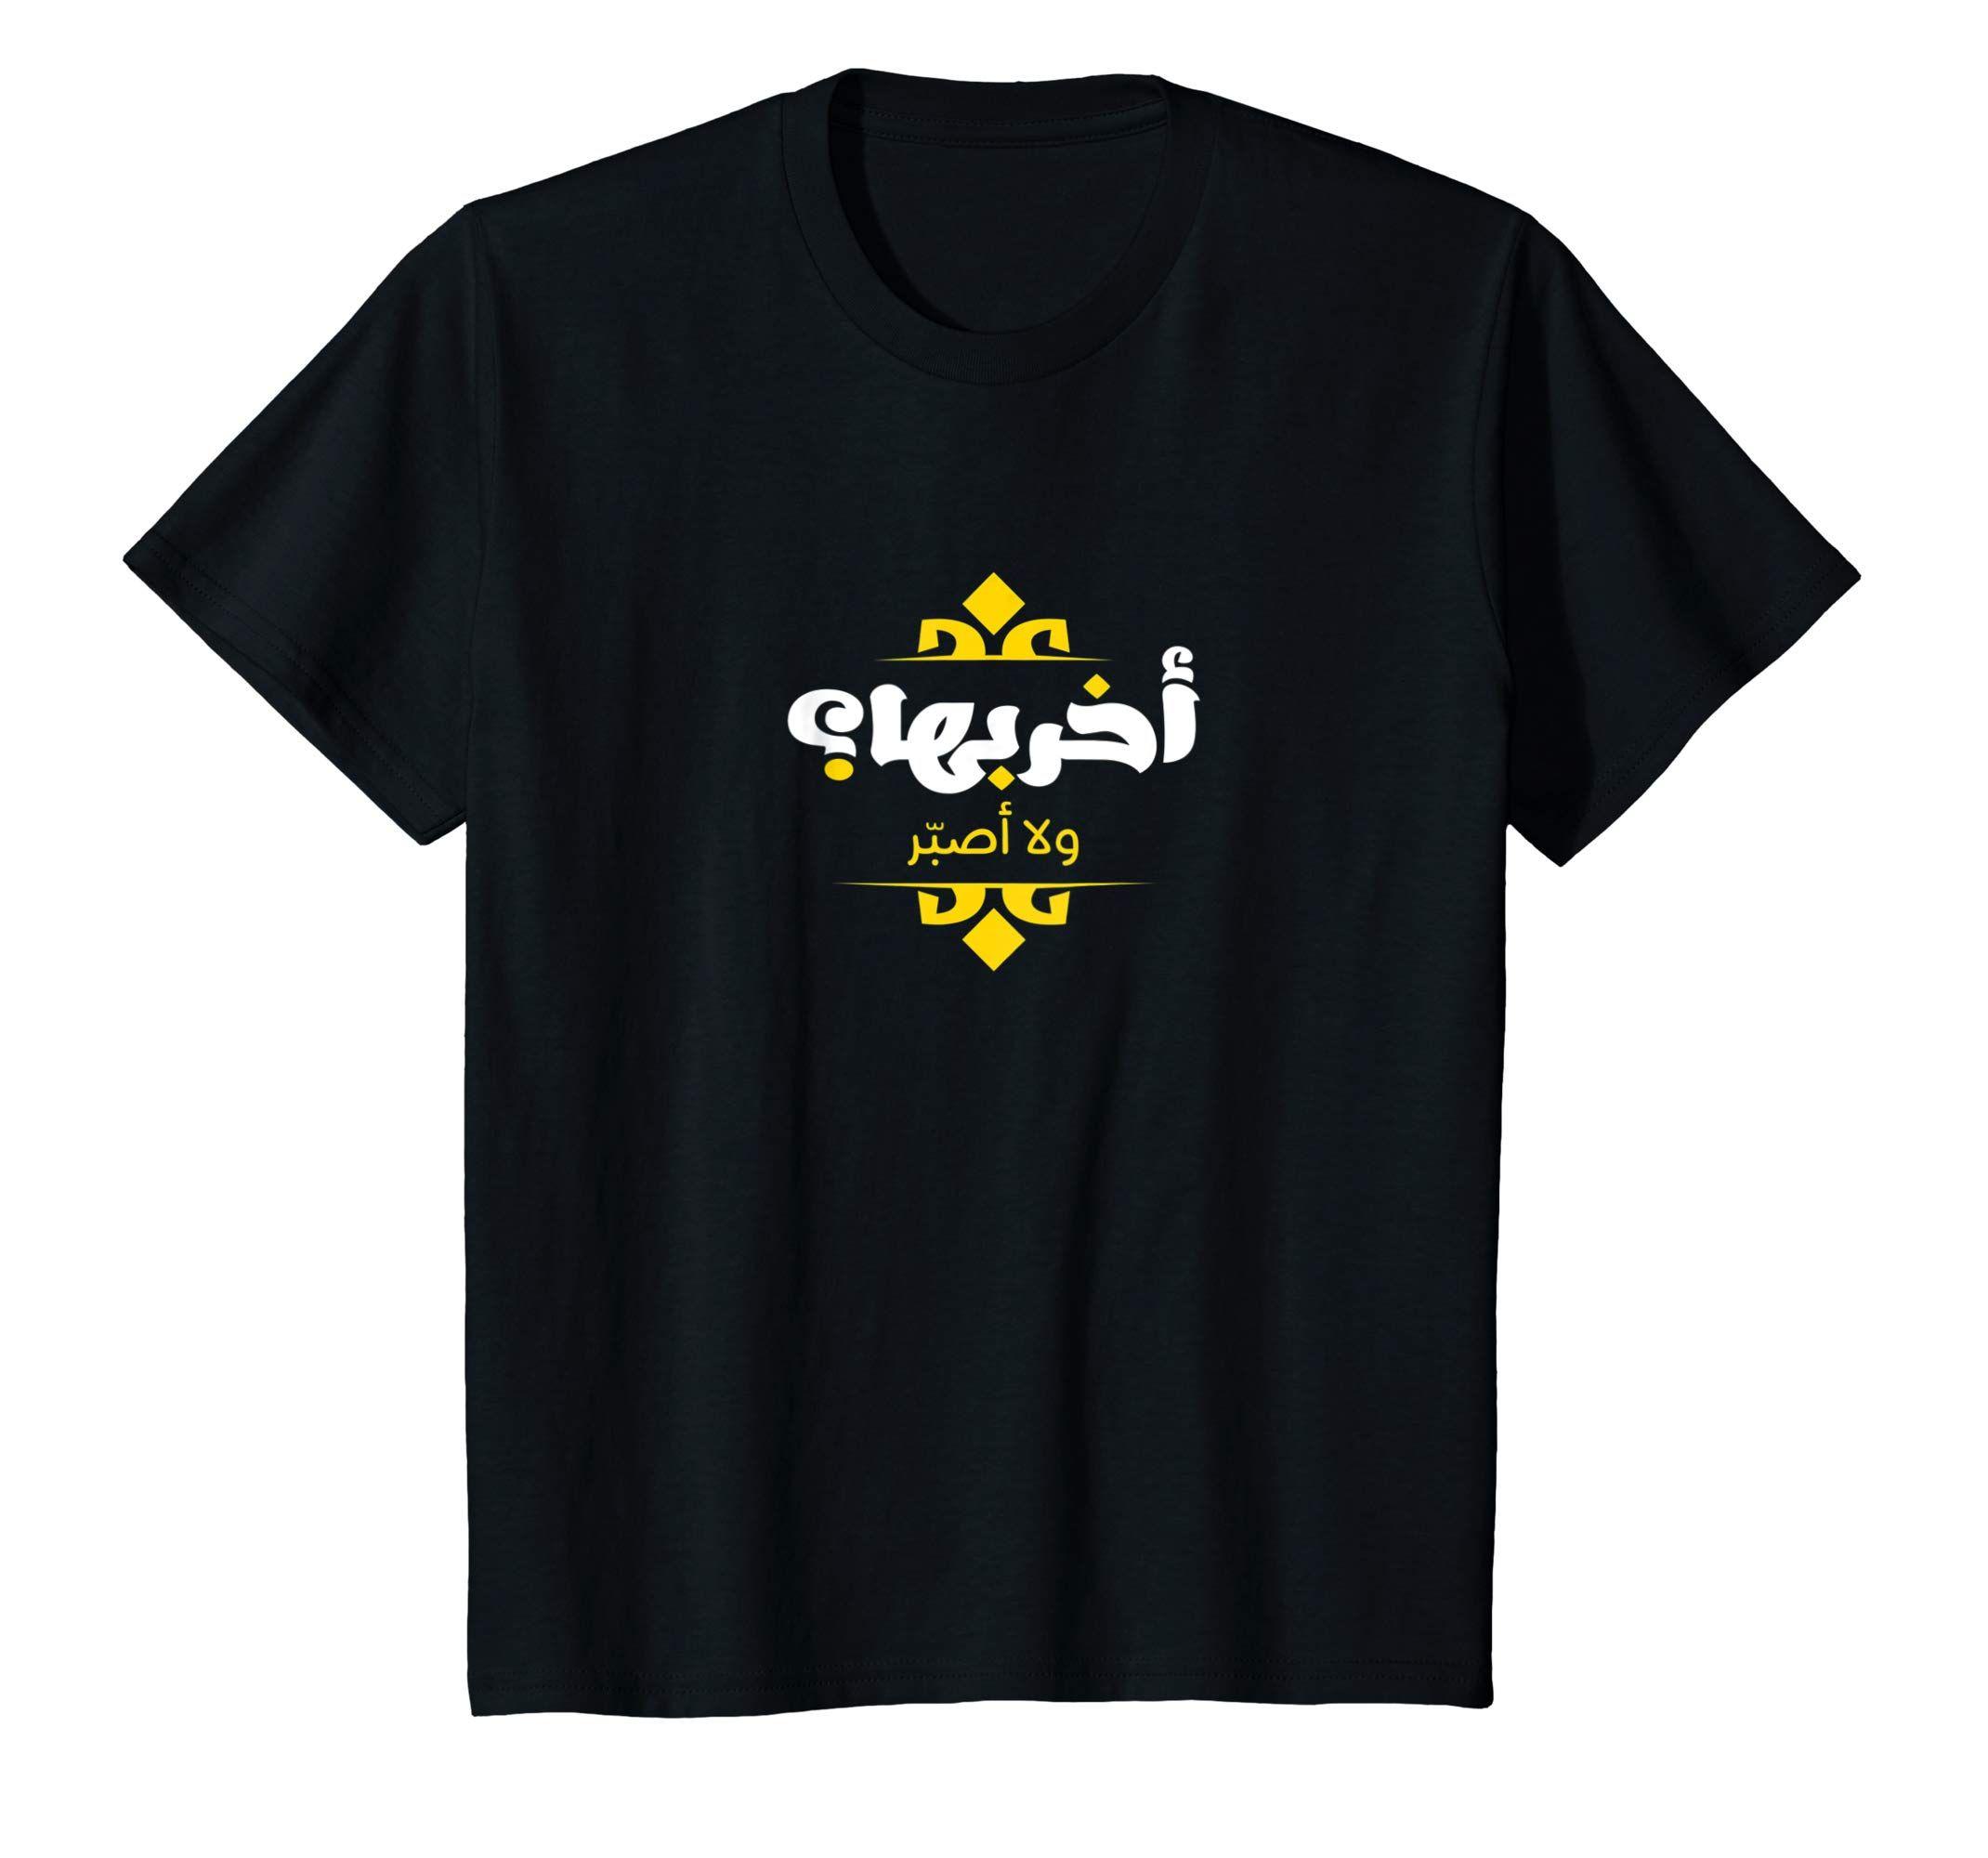 Funny Well Known Logo - Arabic Funny Calligraphy T Shirt. Arabic Shirt: Clothing